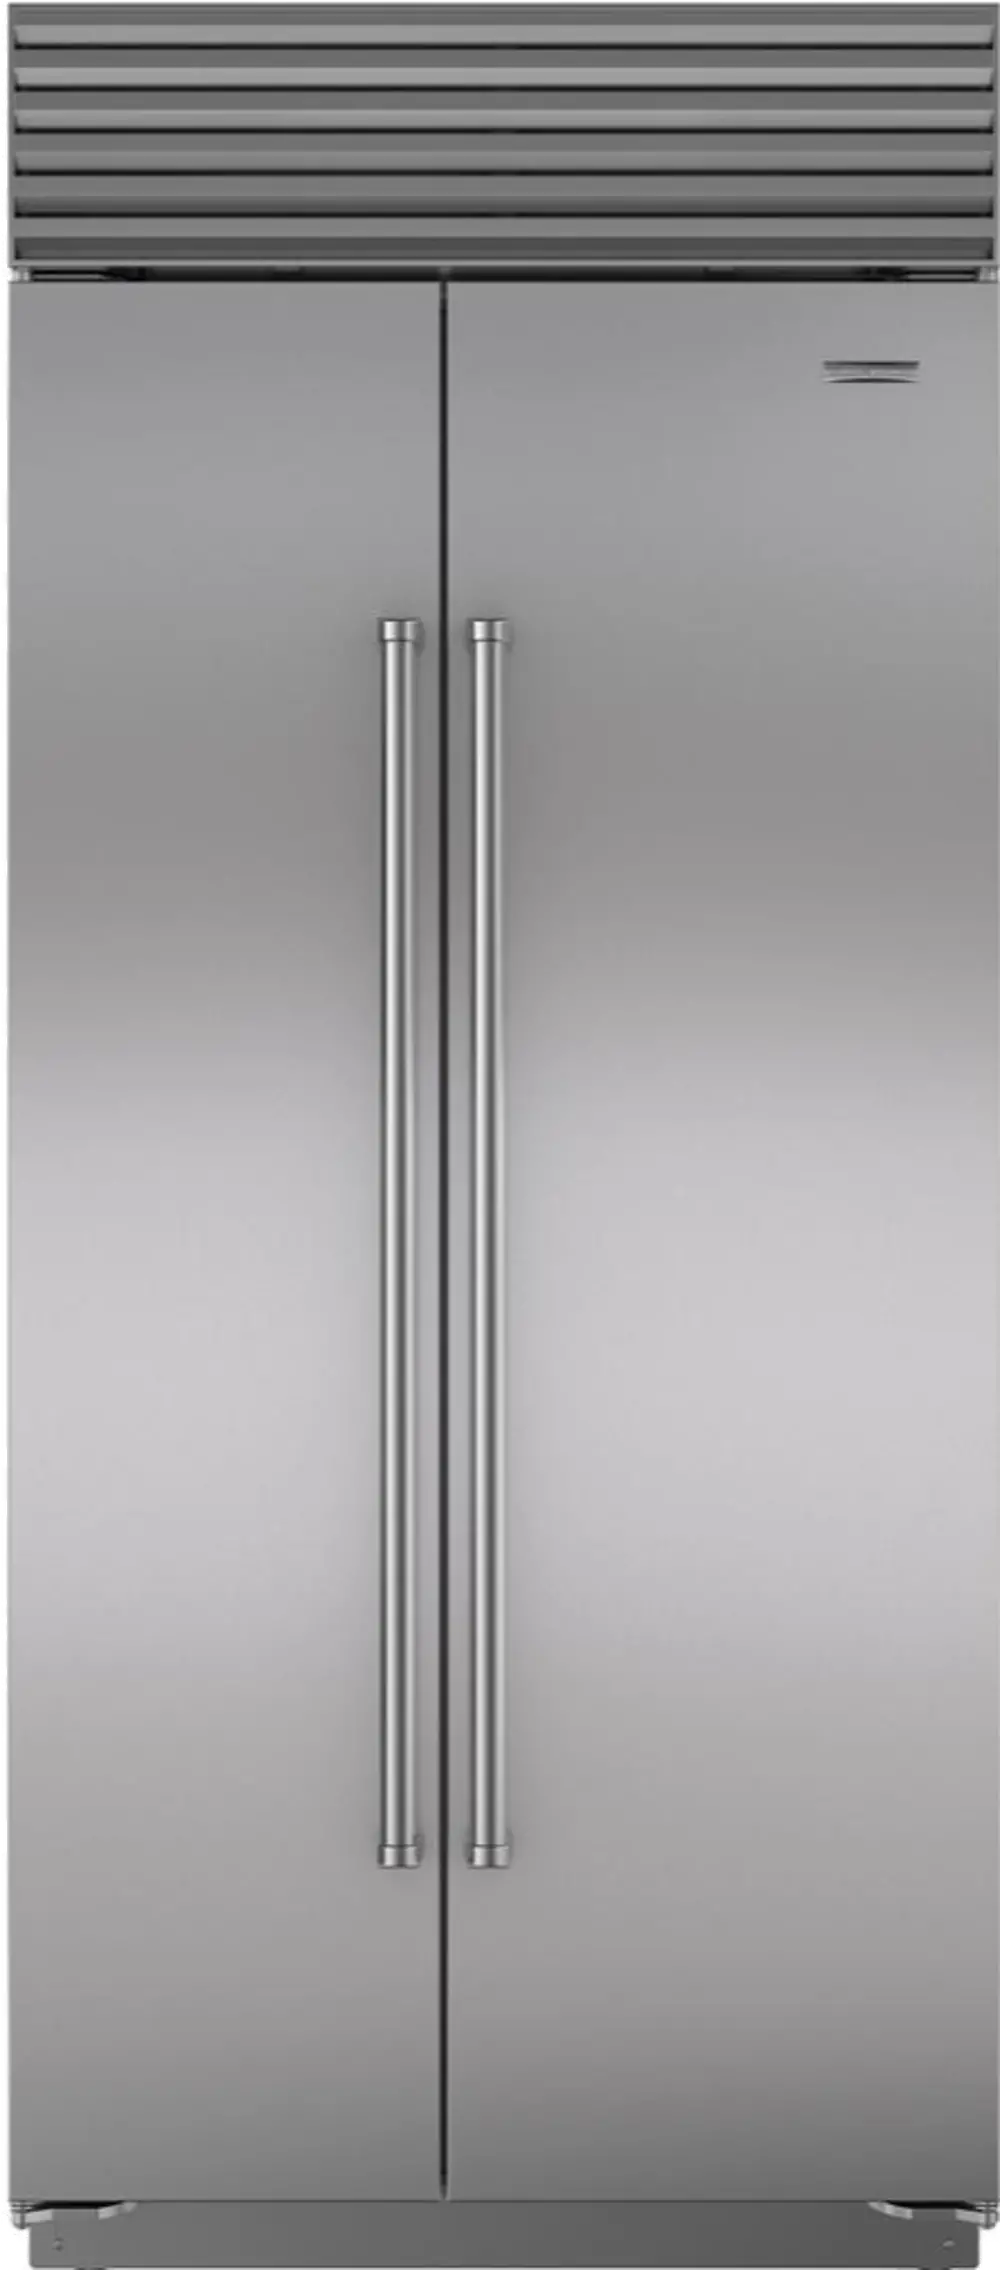 BI-36S/S/PH Sub-Zero 36 Inch Classic Side by Side Smart Refrigerator - 20.6 cu. ft., Stainless Steel-1